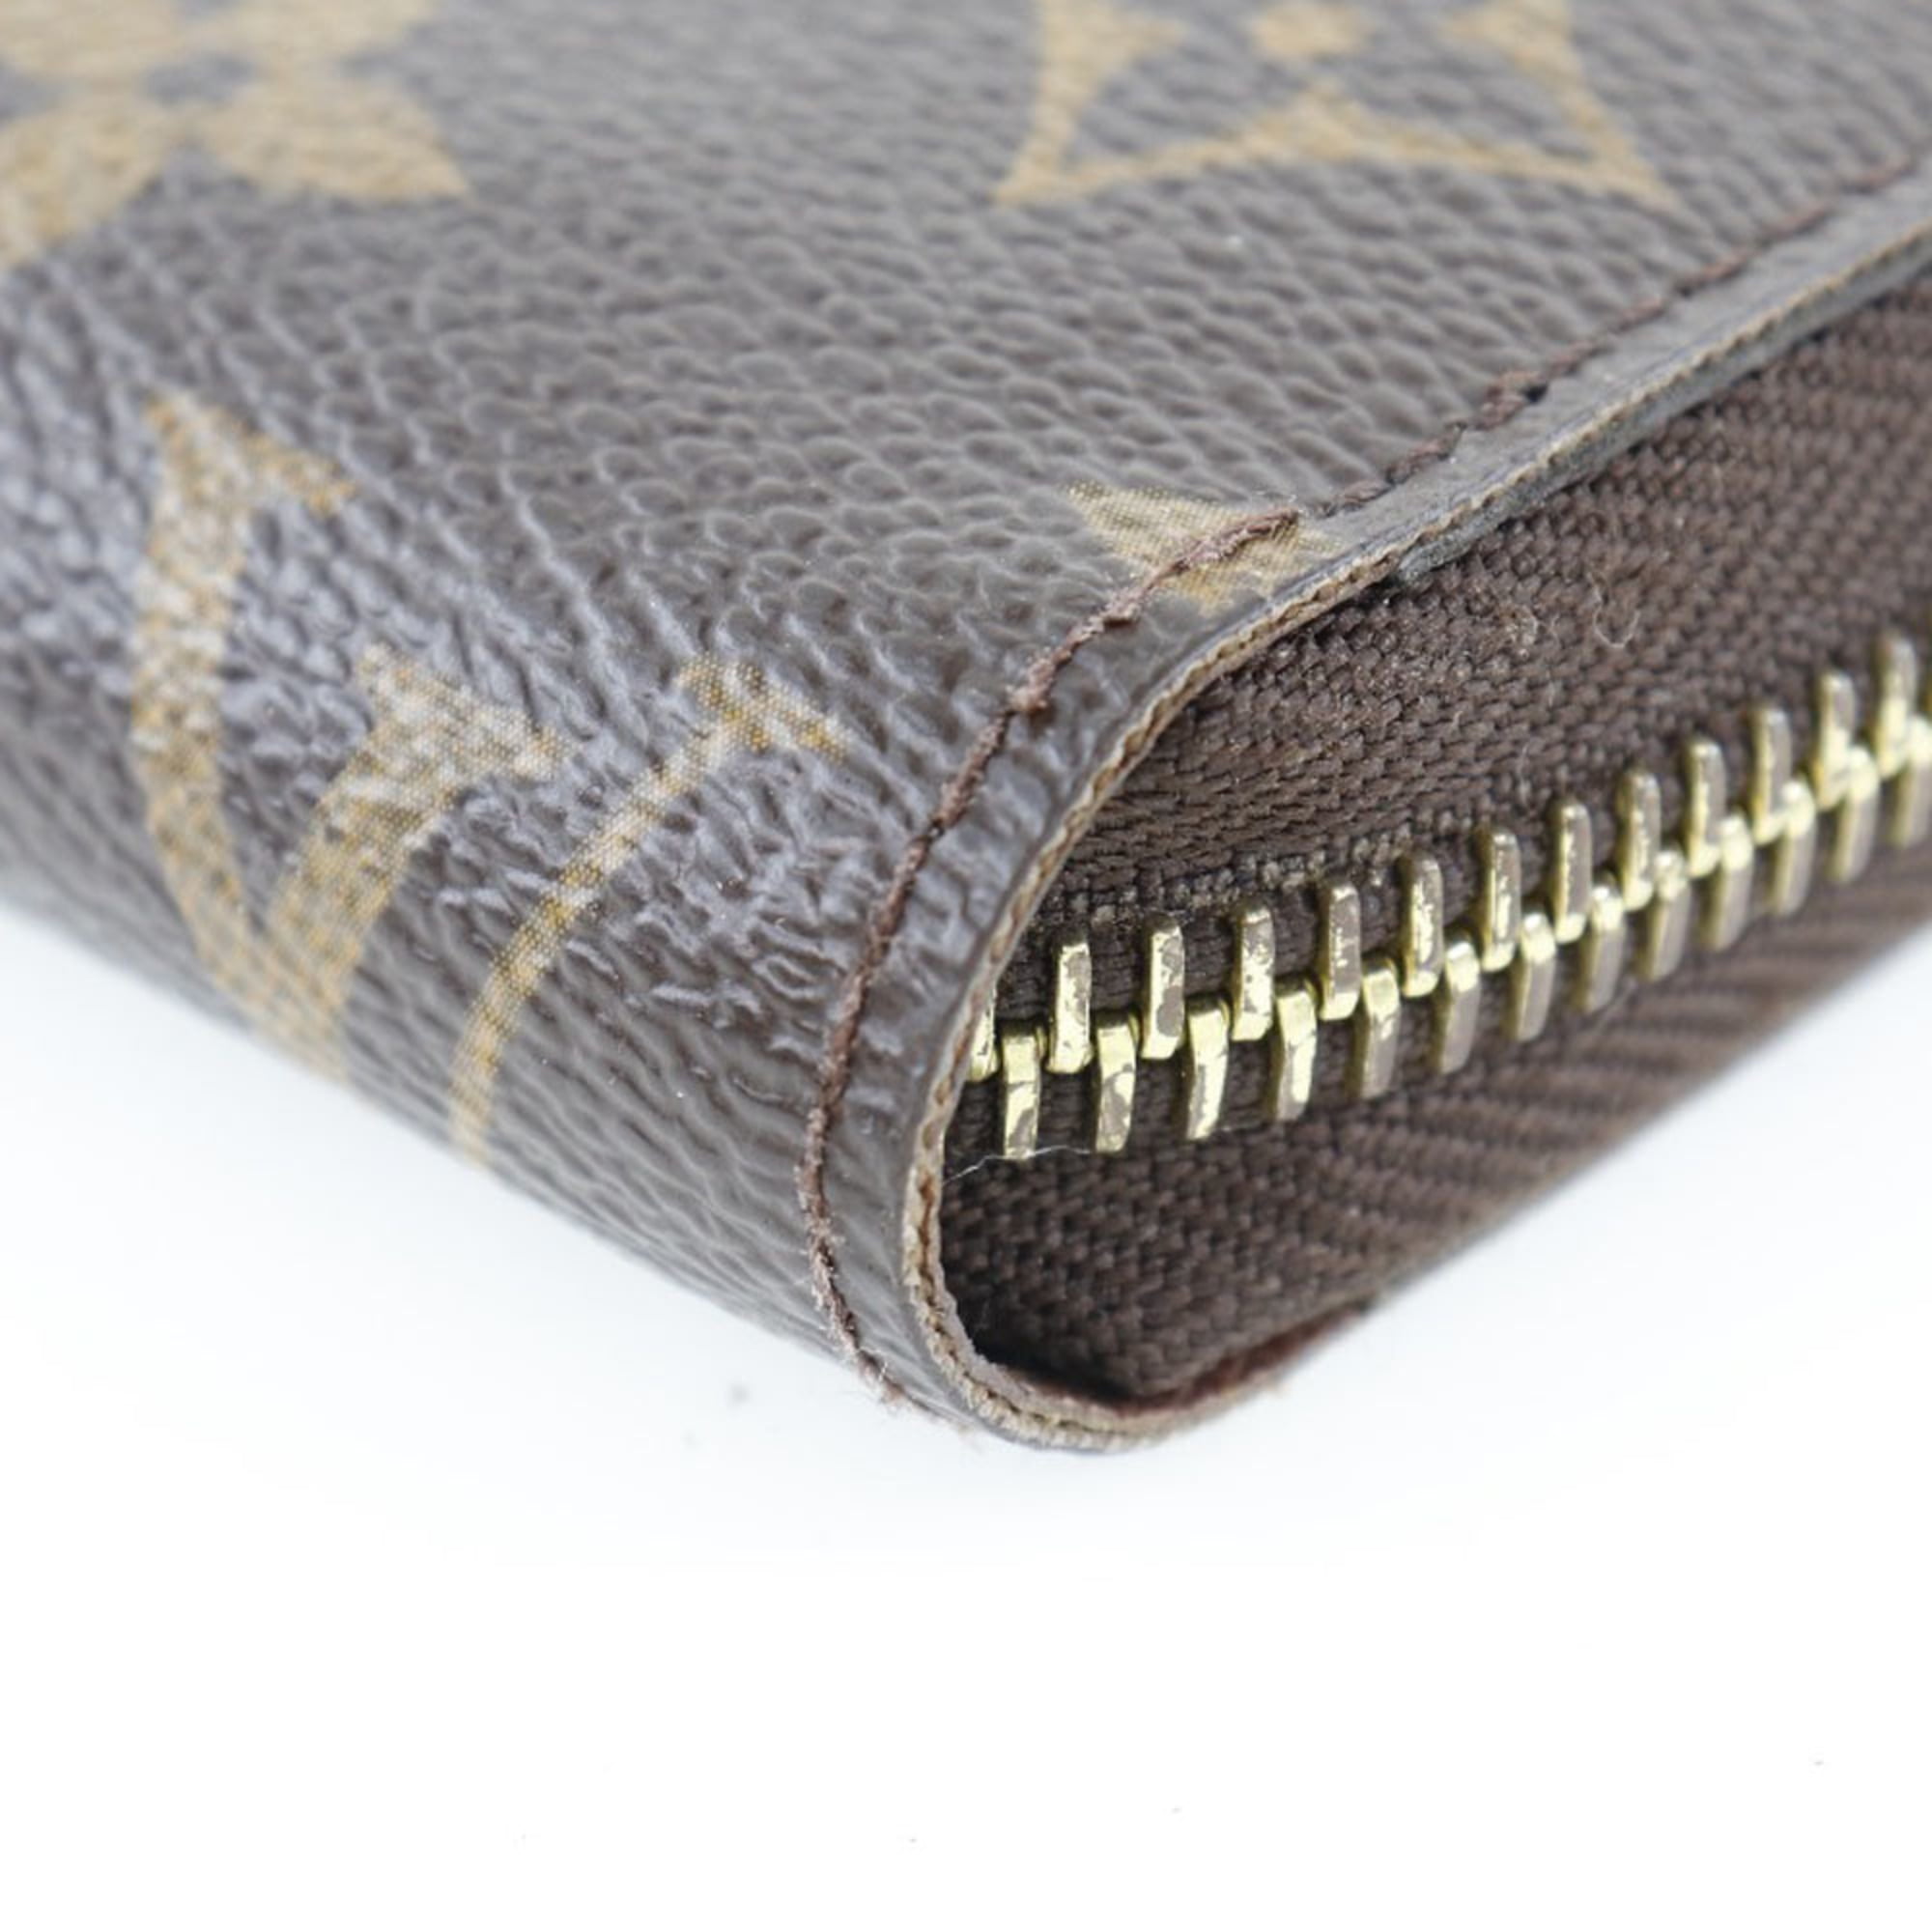 LOUIS VUITTON ZIPPY CLASSIC WALLET Authentic Louis Vuitton canvas material  upcycled and repurposed into wallet .Turke…